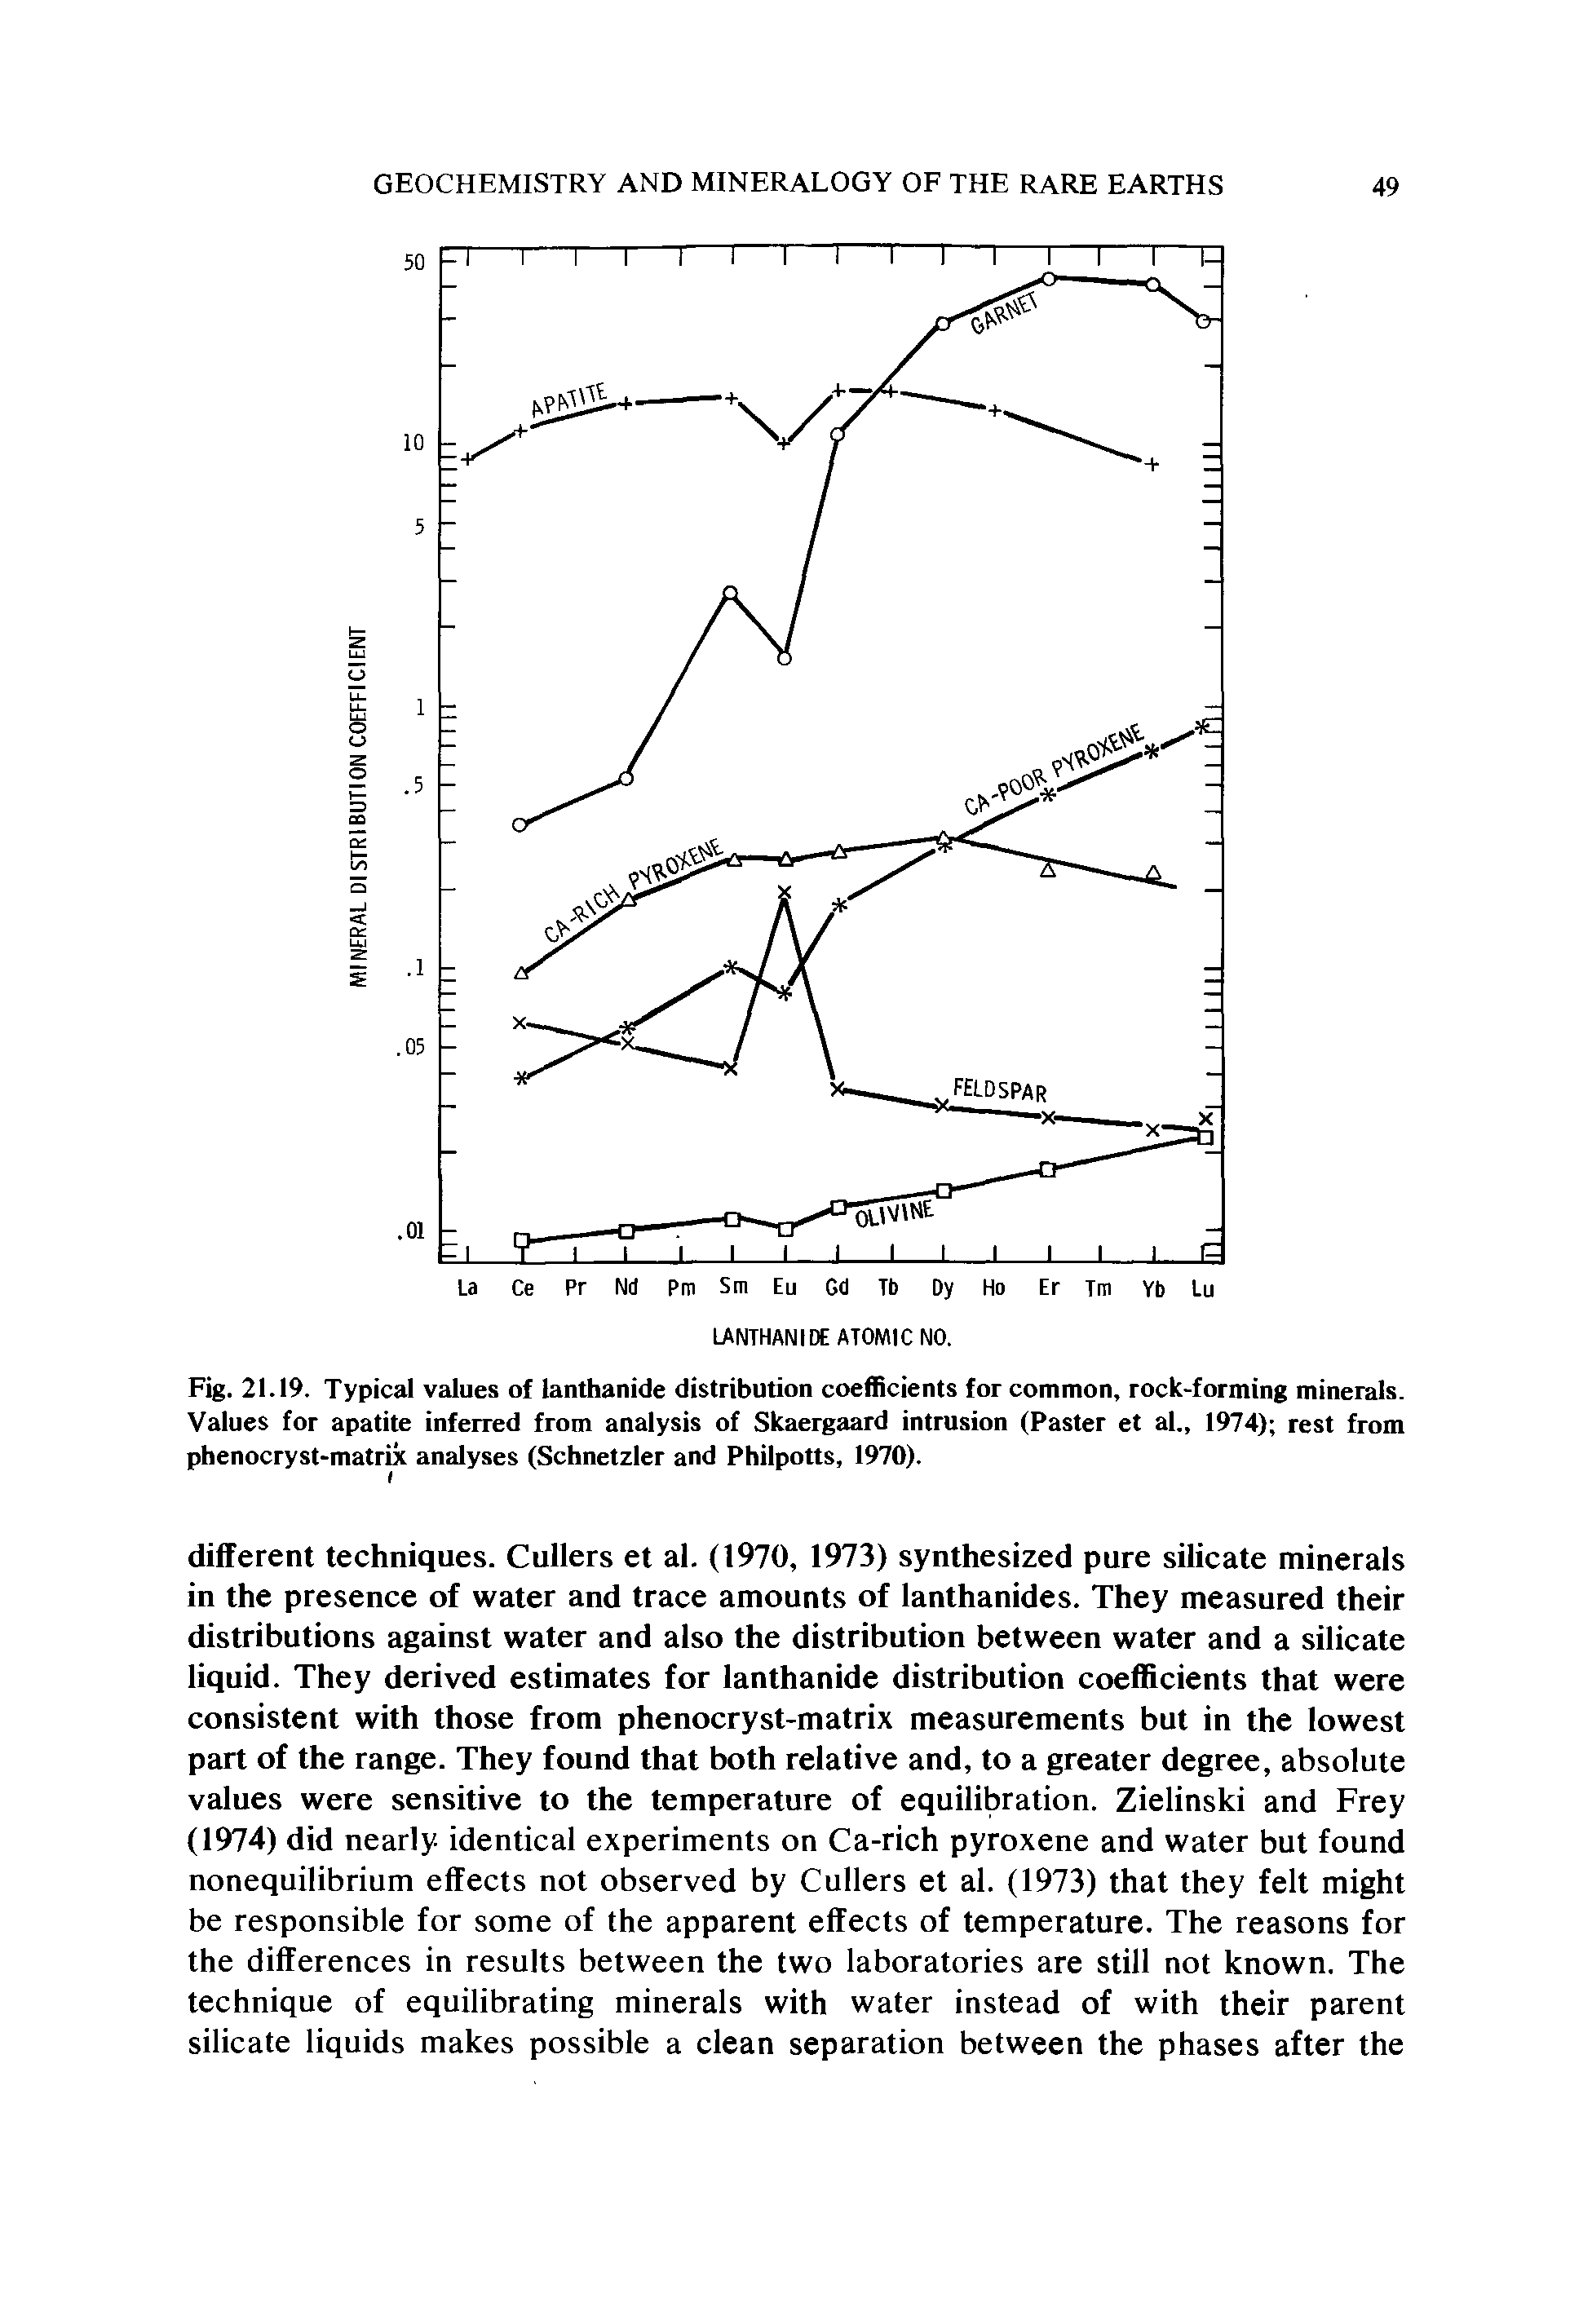 Fig. 21.19. Typical values of lanthanide distribution coefficients for common, rock-forming minerals. Values for apatite inferred from analysis of Skaergaard intrusion (Paster et al., 1974) rest from phenocryst-matrix analyses (Schnetzler and Philpotts, 1970).